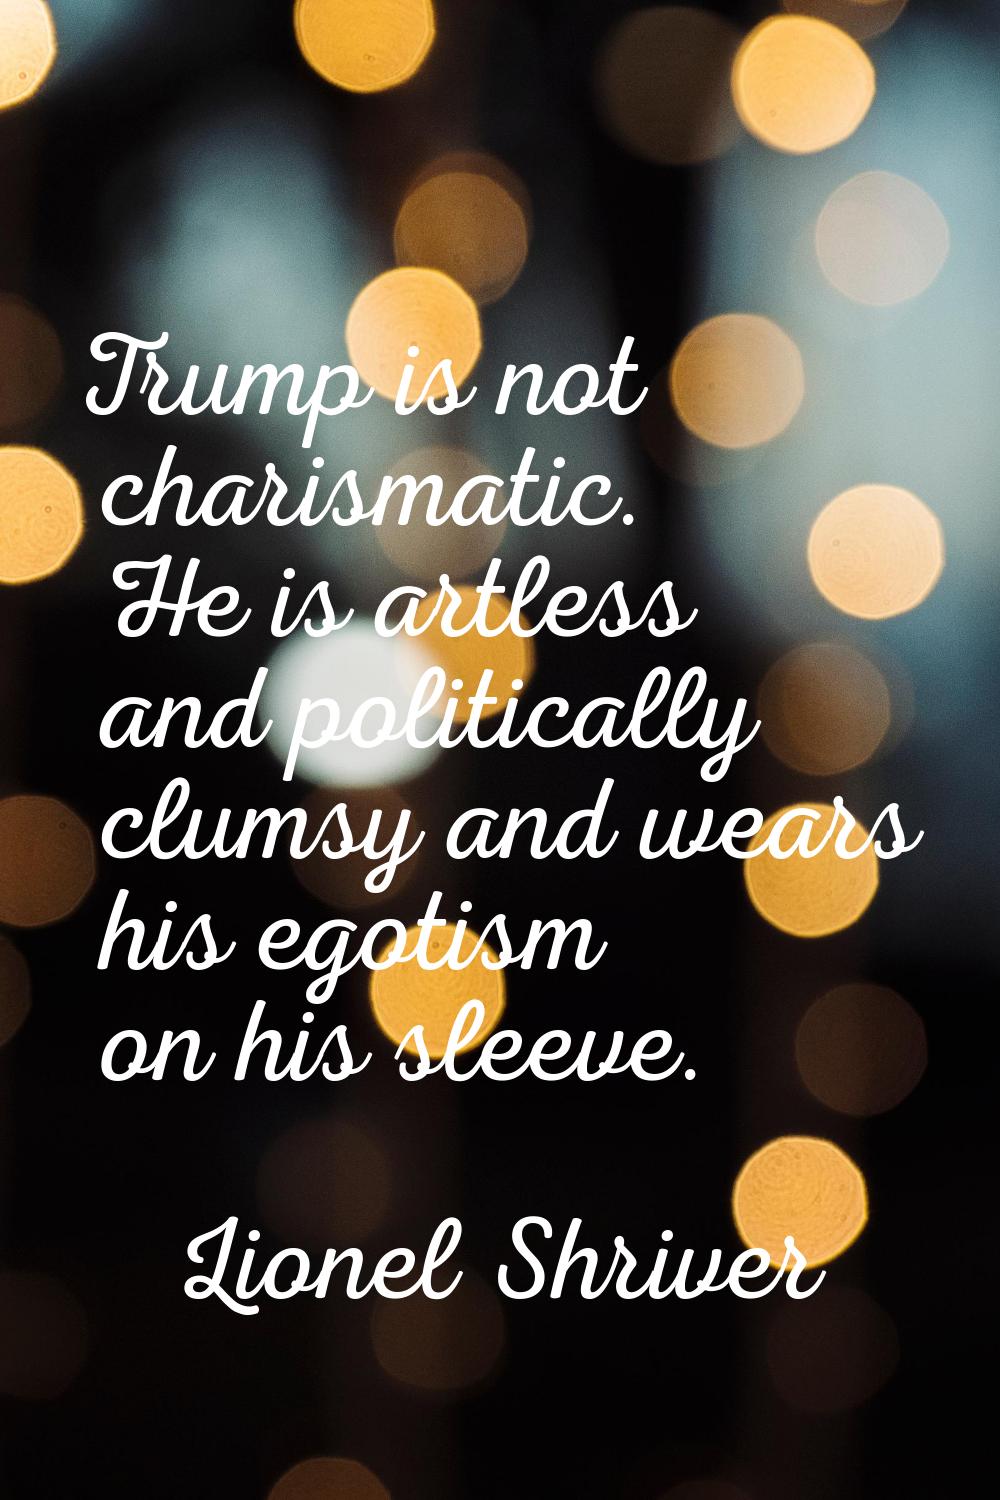 Trump is not charismatic. He is artless and politically clumsy and wears his egotism on his sleeve.